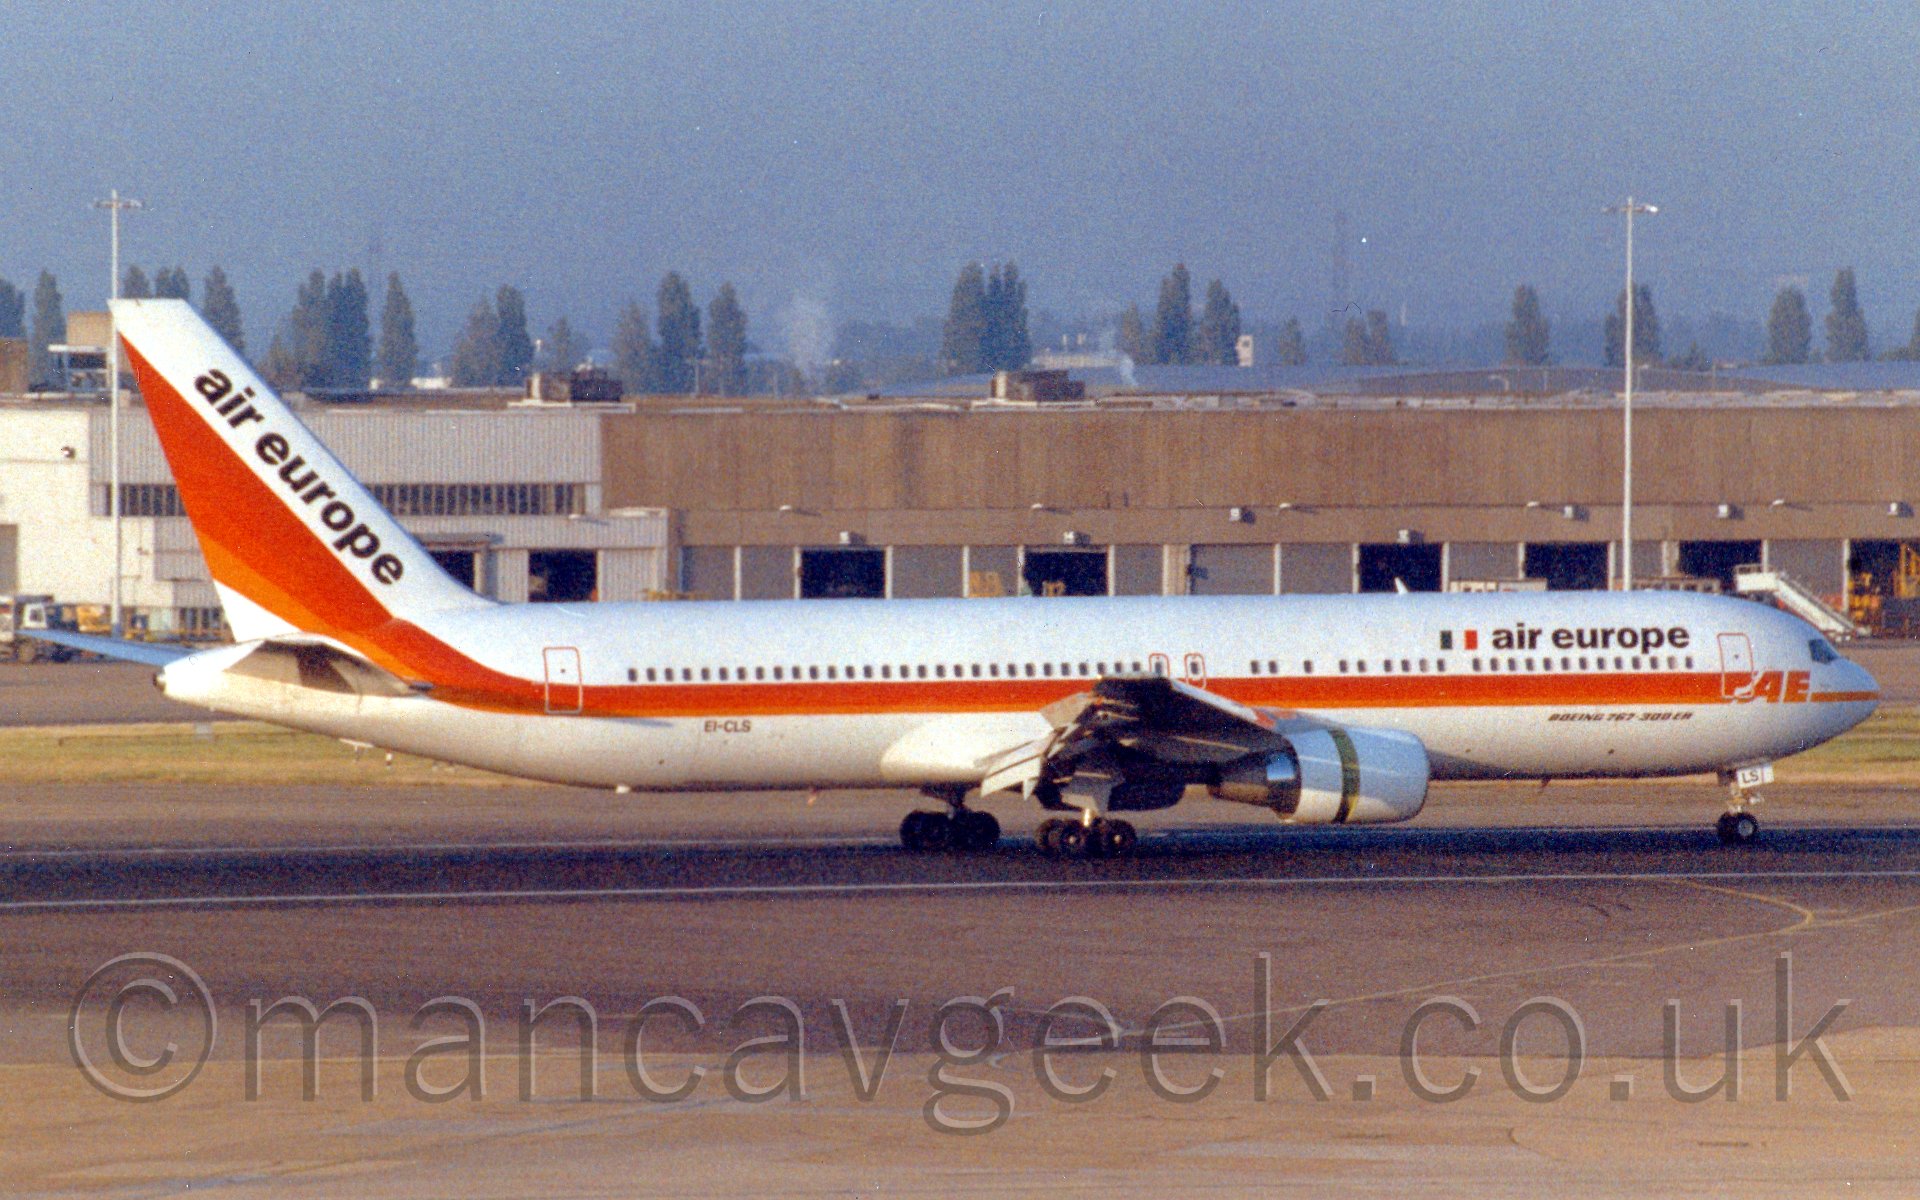 Side view of a twin engined jet airliner travelling from left to right, with flaps fully extended behind the wing, and the thrust reversers open on the engines, suggesting it has just landed. The plane is mostly white, with a red and orange stripe running along the body from the nose and sweeping up into the tail, with the letters "AE" overlaid at the front, between the cockpit and the forward door. There is an italian flag (Green, white, and red vertical bars) and "Air Europe" titles on the forward upper fuselage, just aft of the forward door. There are also diagonal "Air Europe" titles on the tail. Behind, there is a large brown cargo hangar, with trees and buildings vanishing in to haze in the distance, under a leaden grey sky.